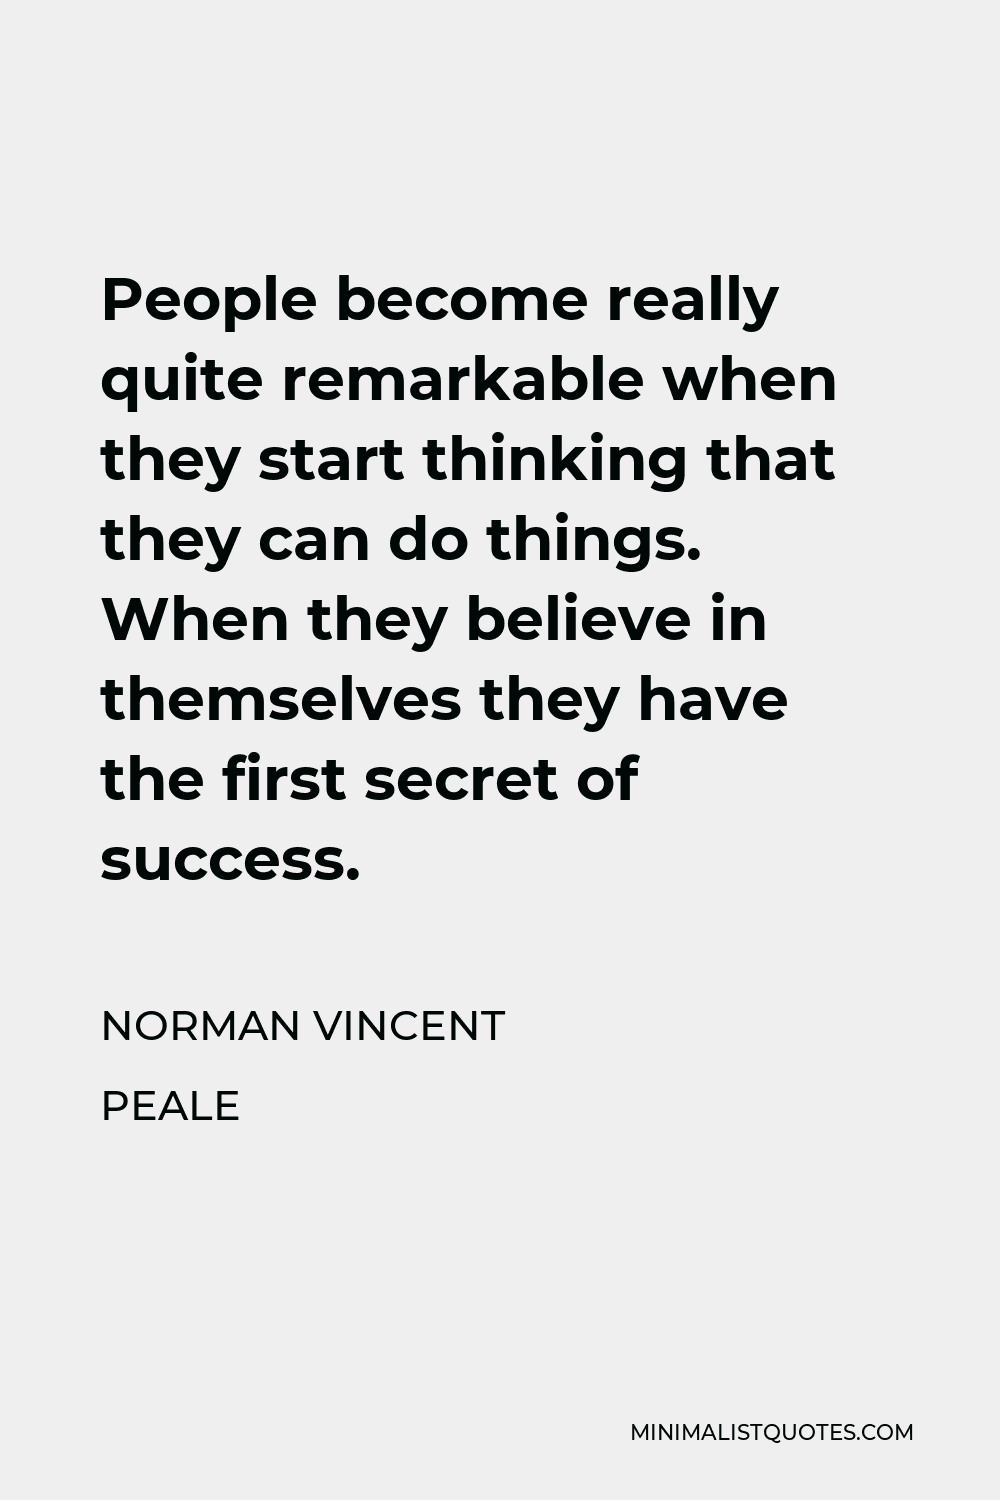 Norman Vincent Peale Quote - People become really quite remarkable when they start thinking that they can do things. When they believe in themselves they have the first secret of success.